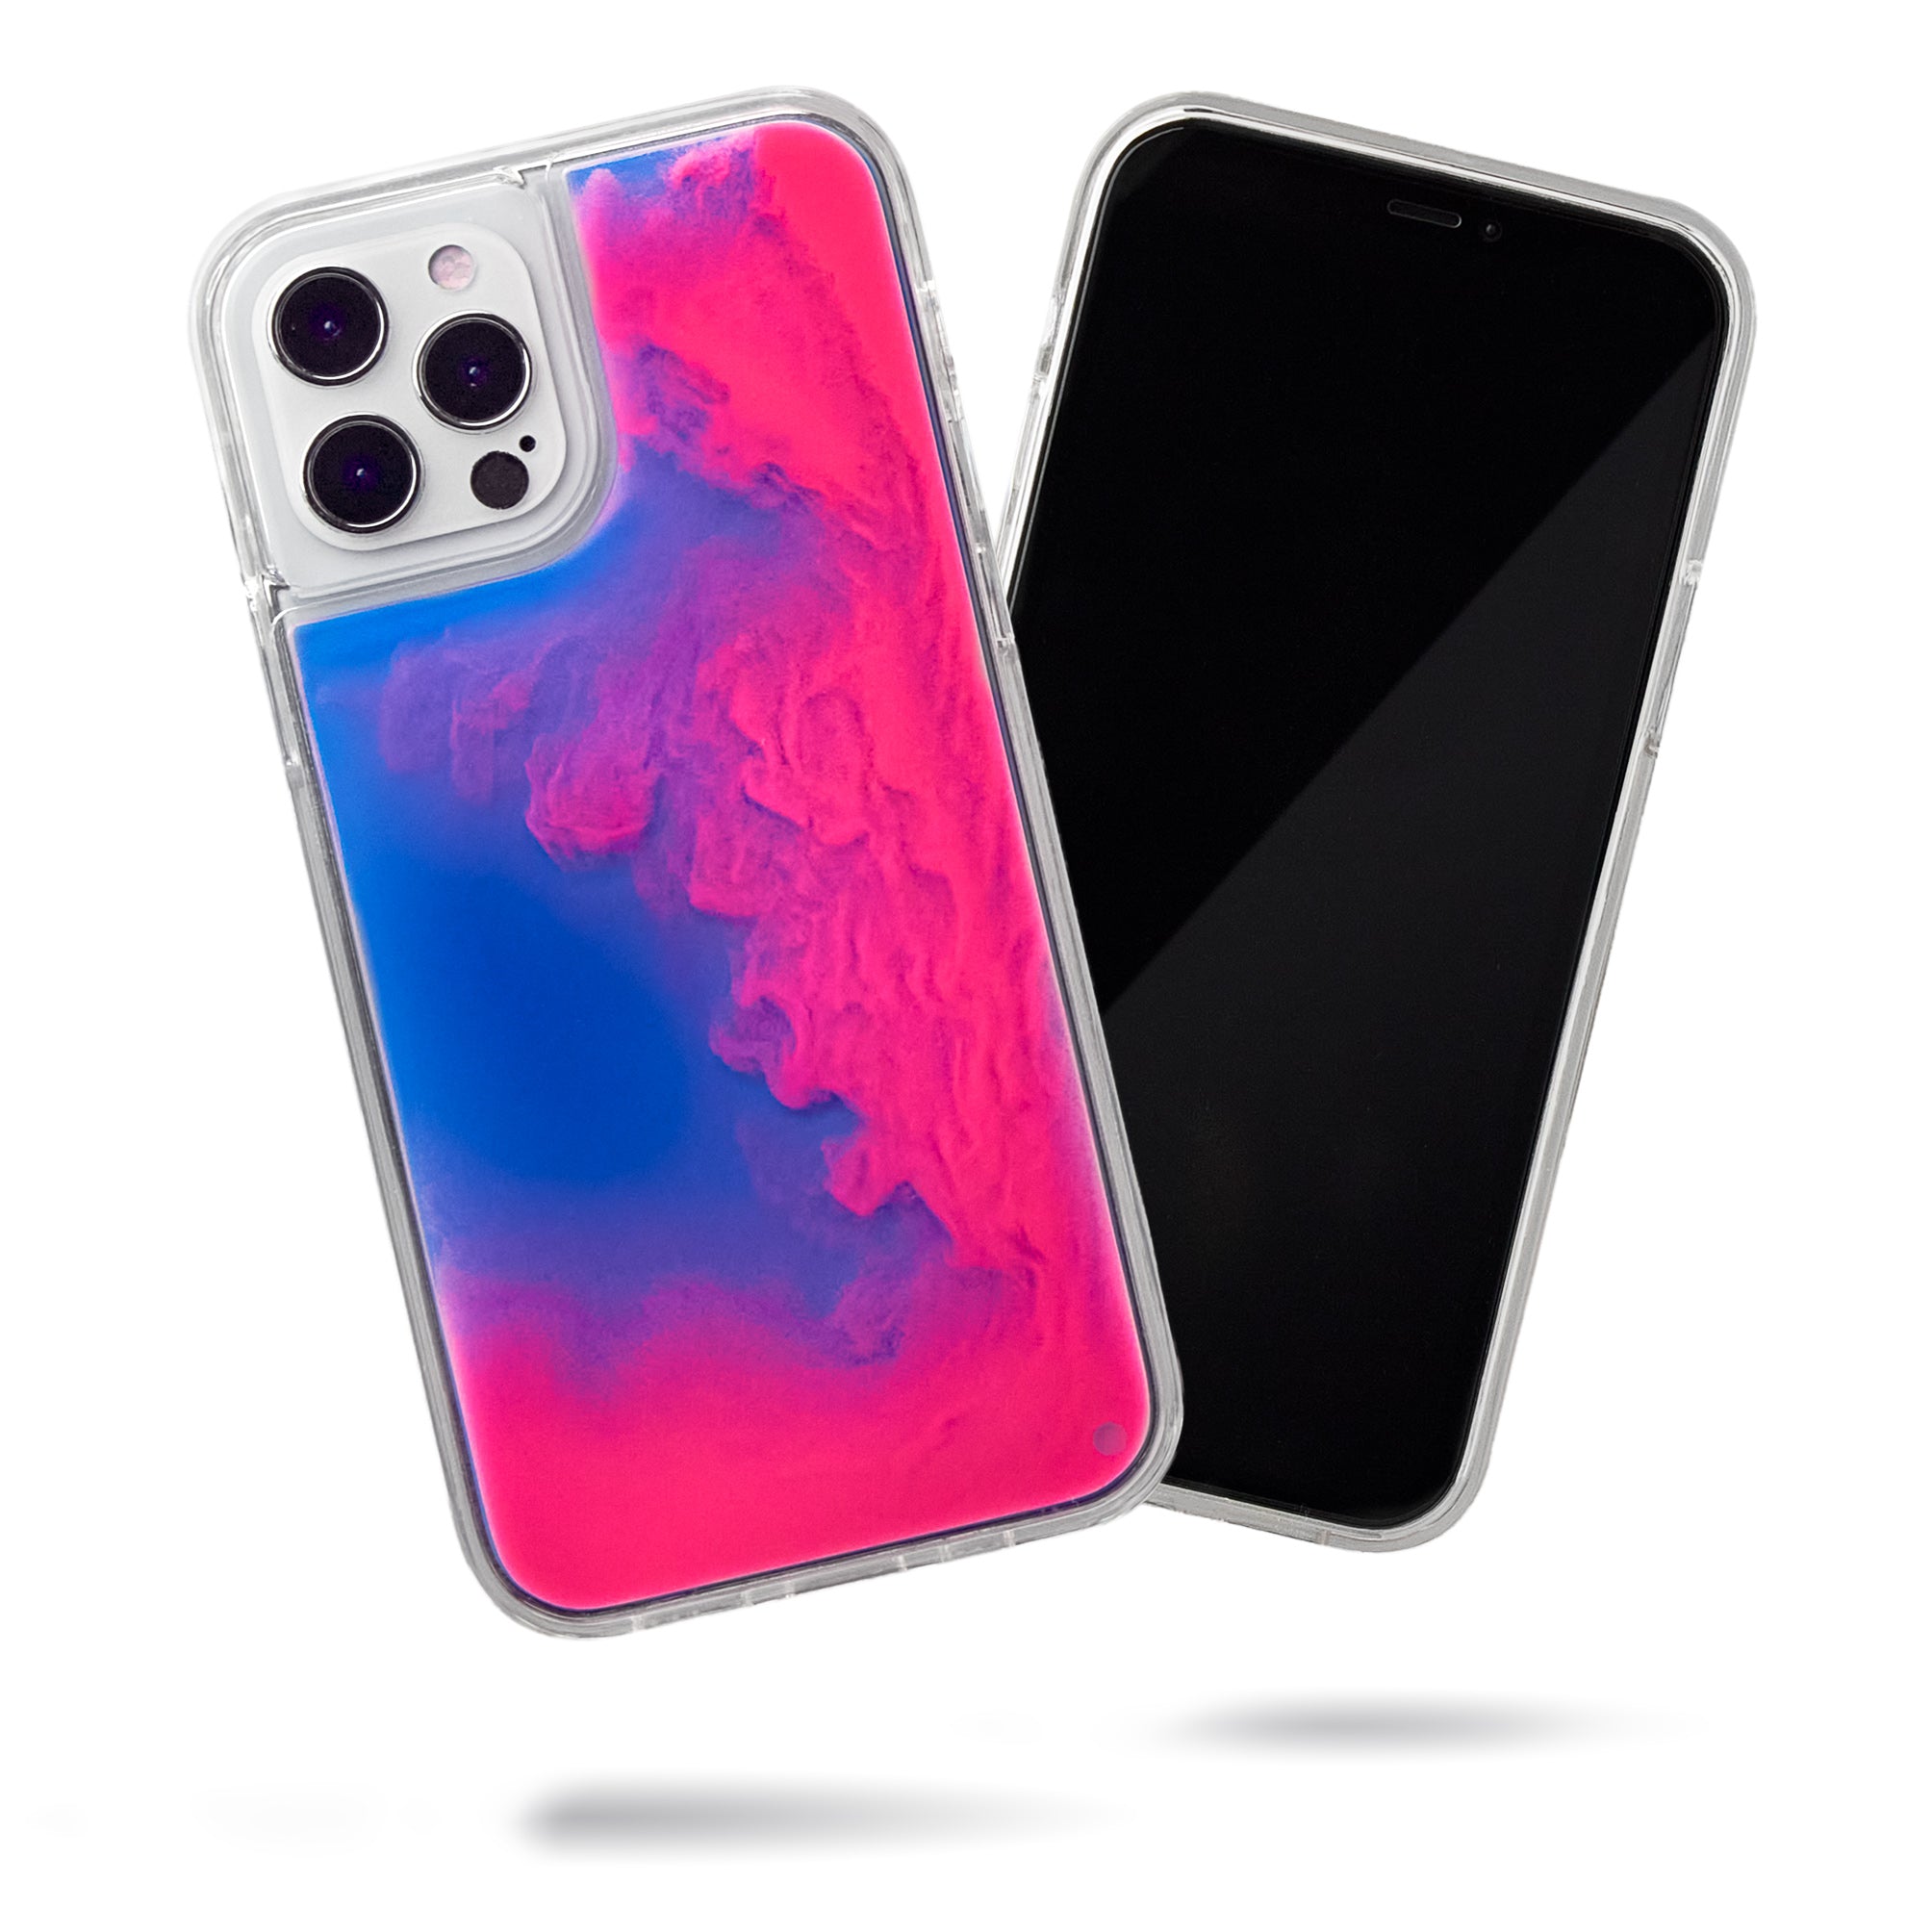 Neon Sand iPhone 12 Pro Max Case - Blueberry and Pink Glow